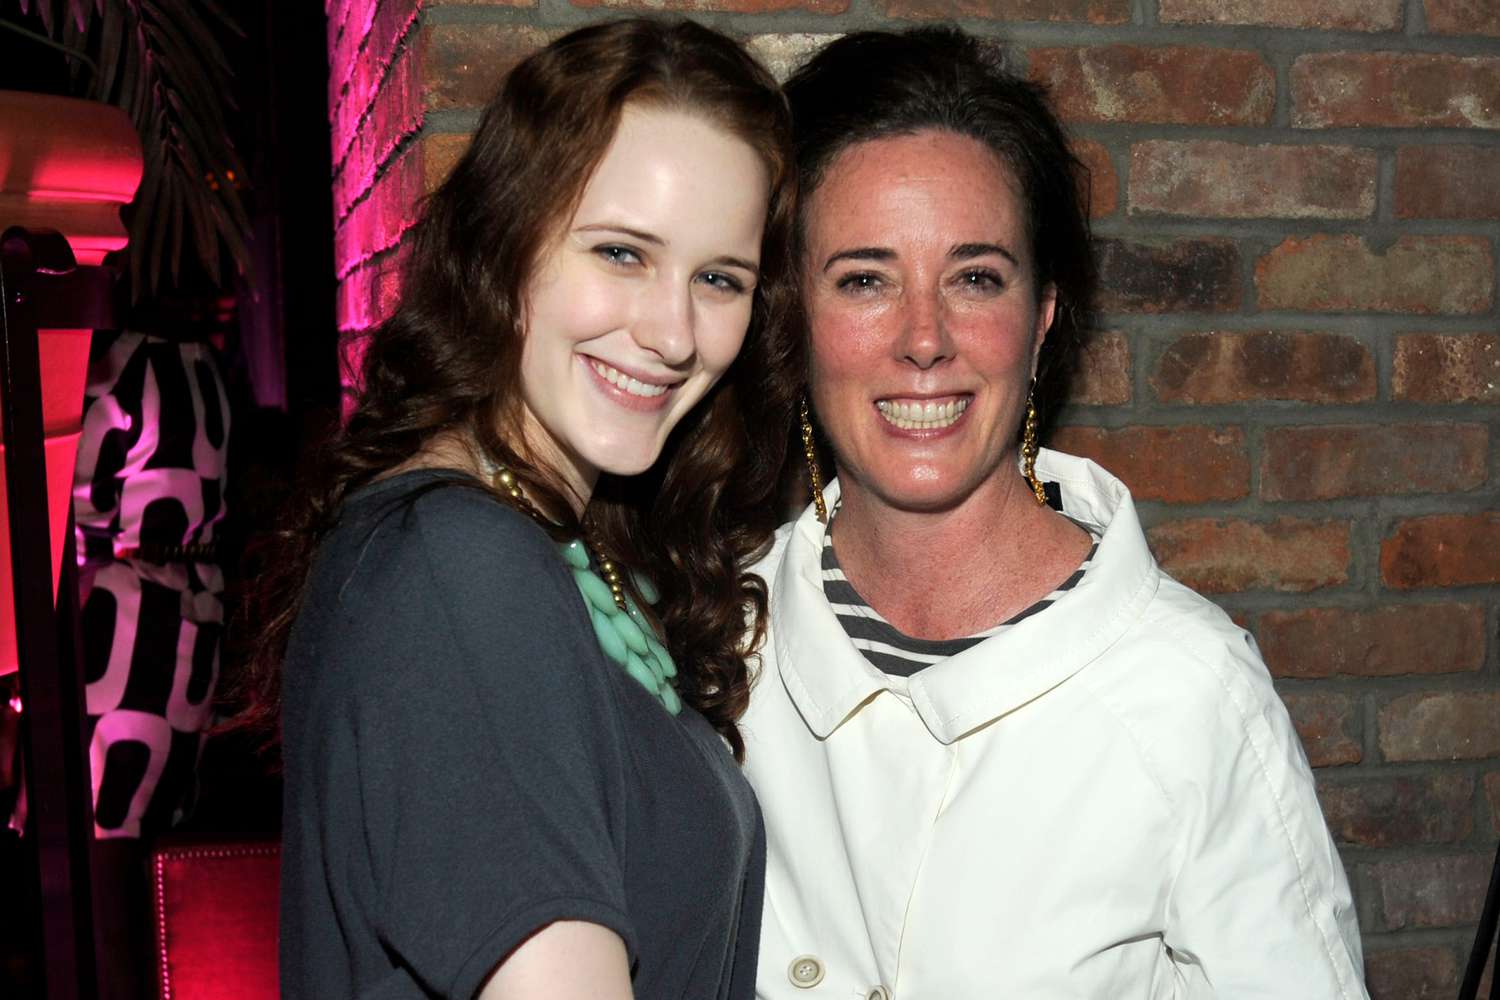 Rachel Brosnahan Remembers Her Aunt Kate Spade 6 Years After Her Death: ‘I Miss You’